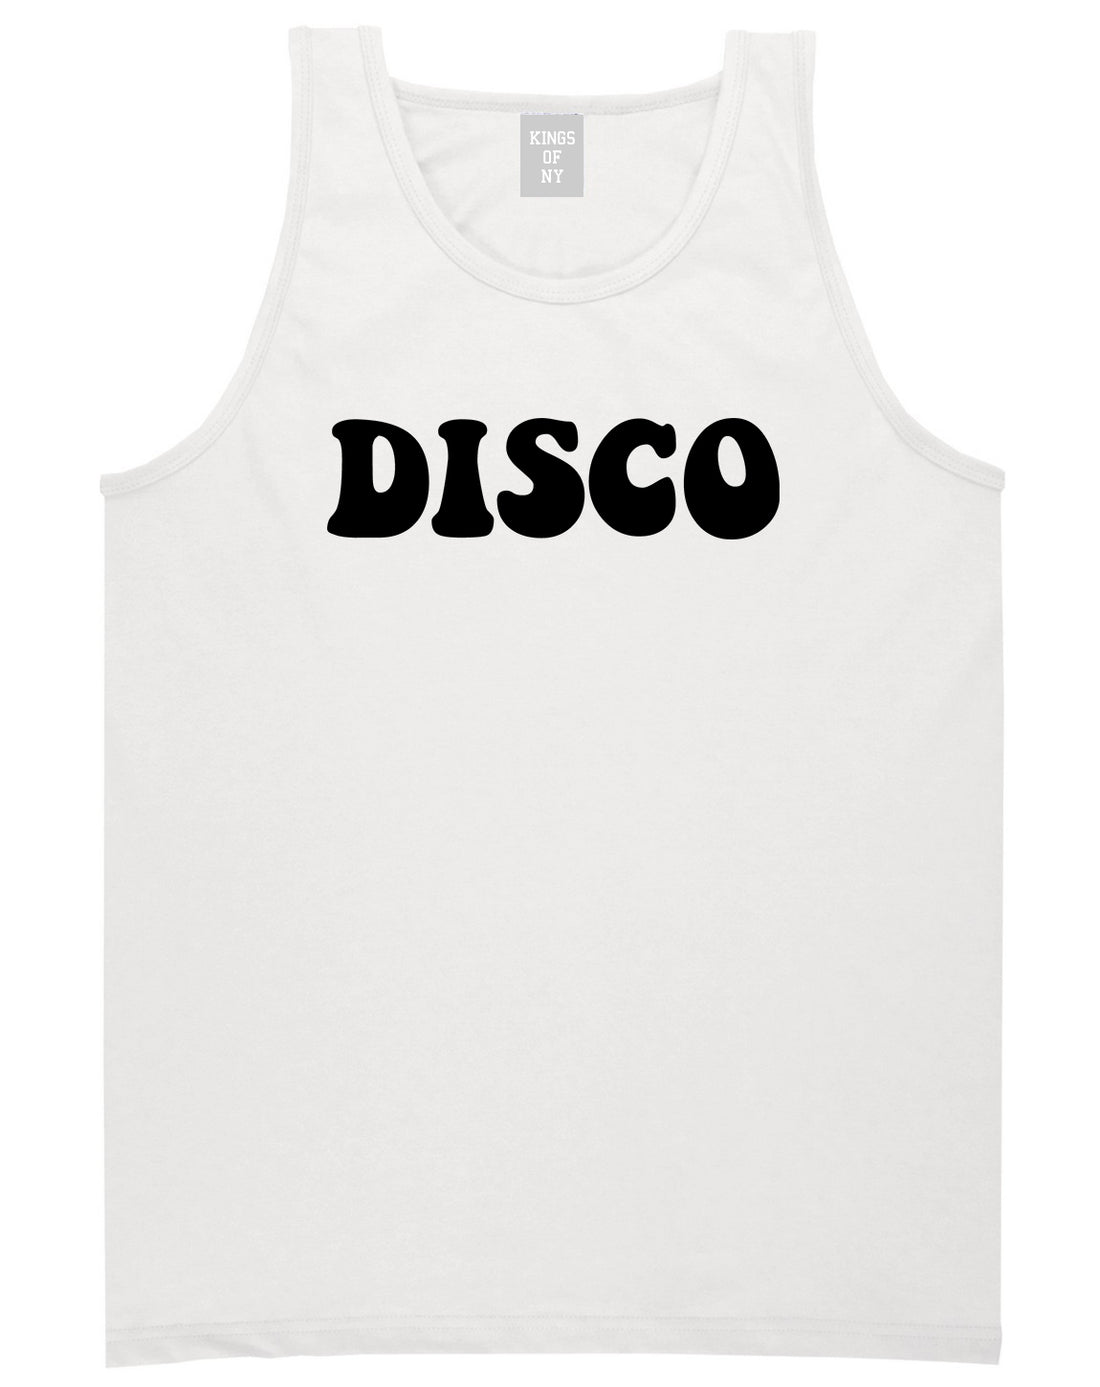 Disco_Music Mens White Tank Top Shirt by Kings Of NY